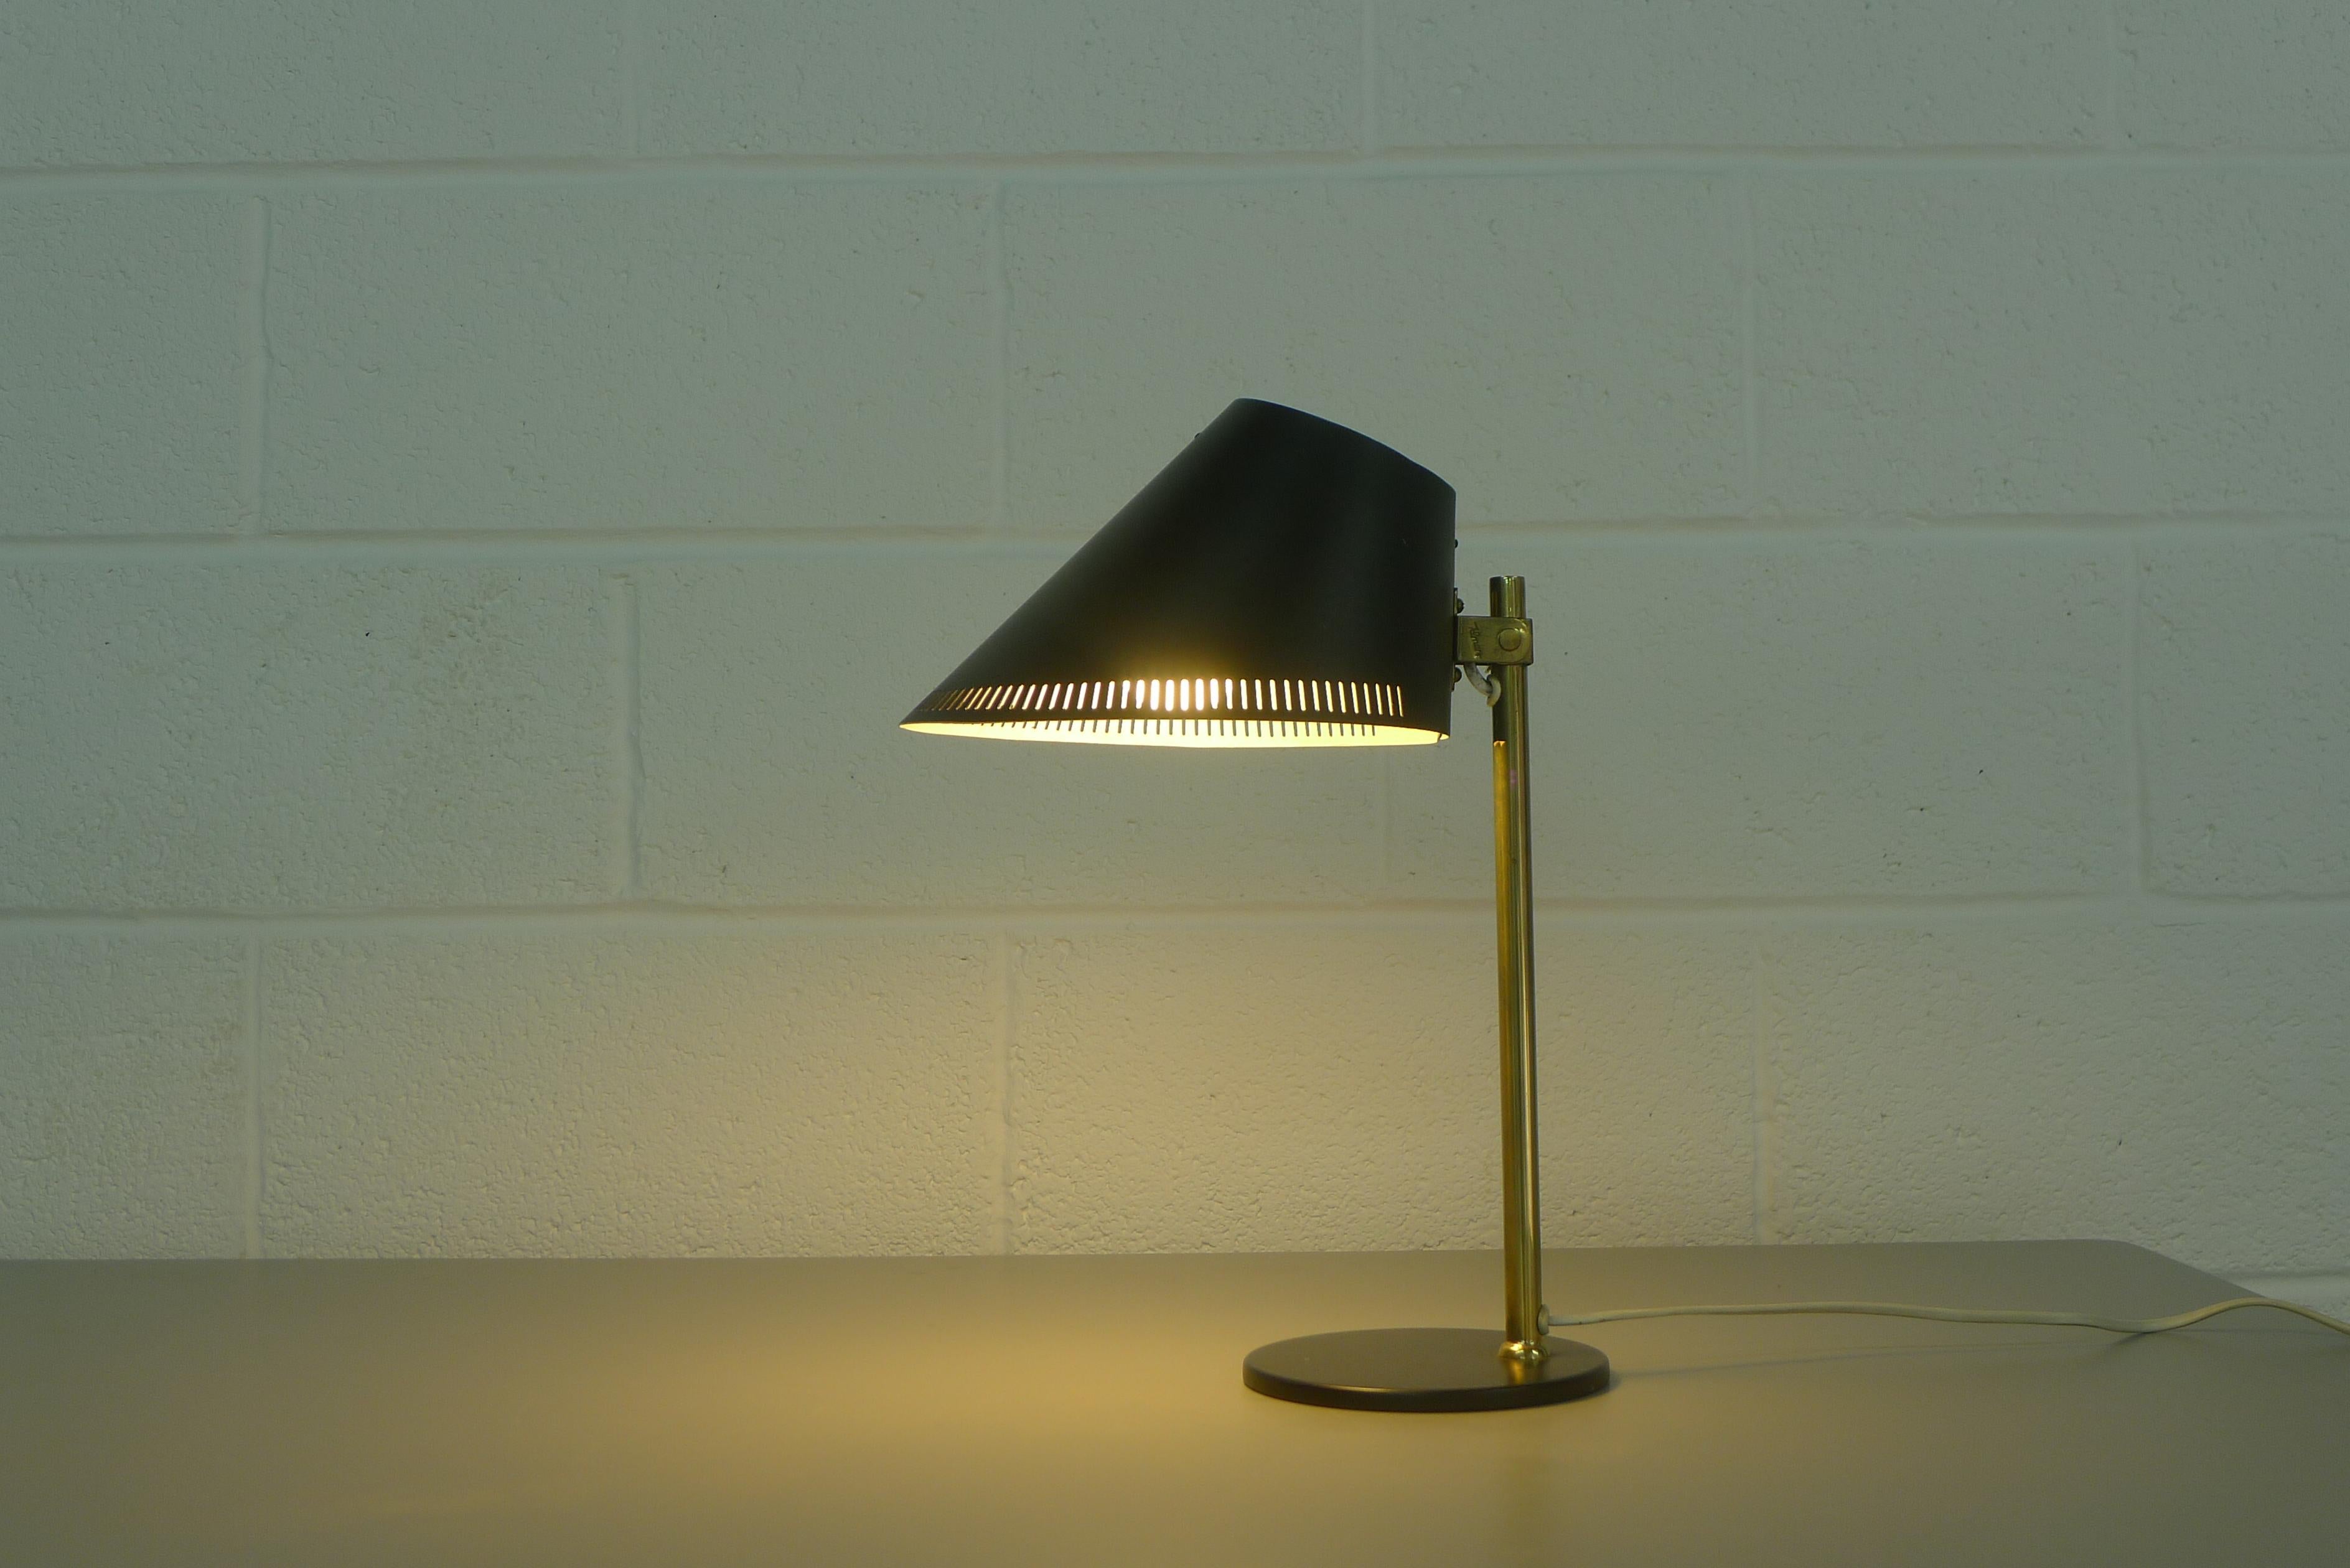 Paavo Tynell desk lamp model 9227 designed in the 1950s for Idman. Black base and black enameled perforated shade joined by brass staem with pivot mechanism allowing the shade to articulate. Signed on the stem bracket.